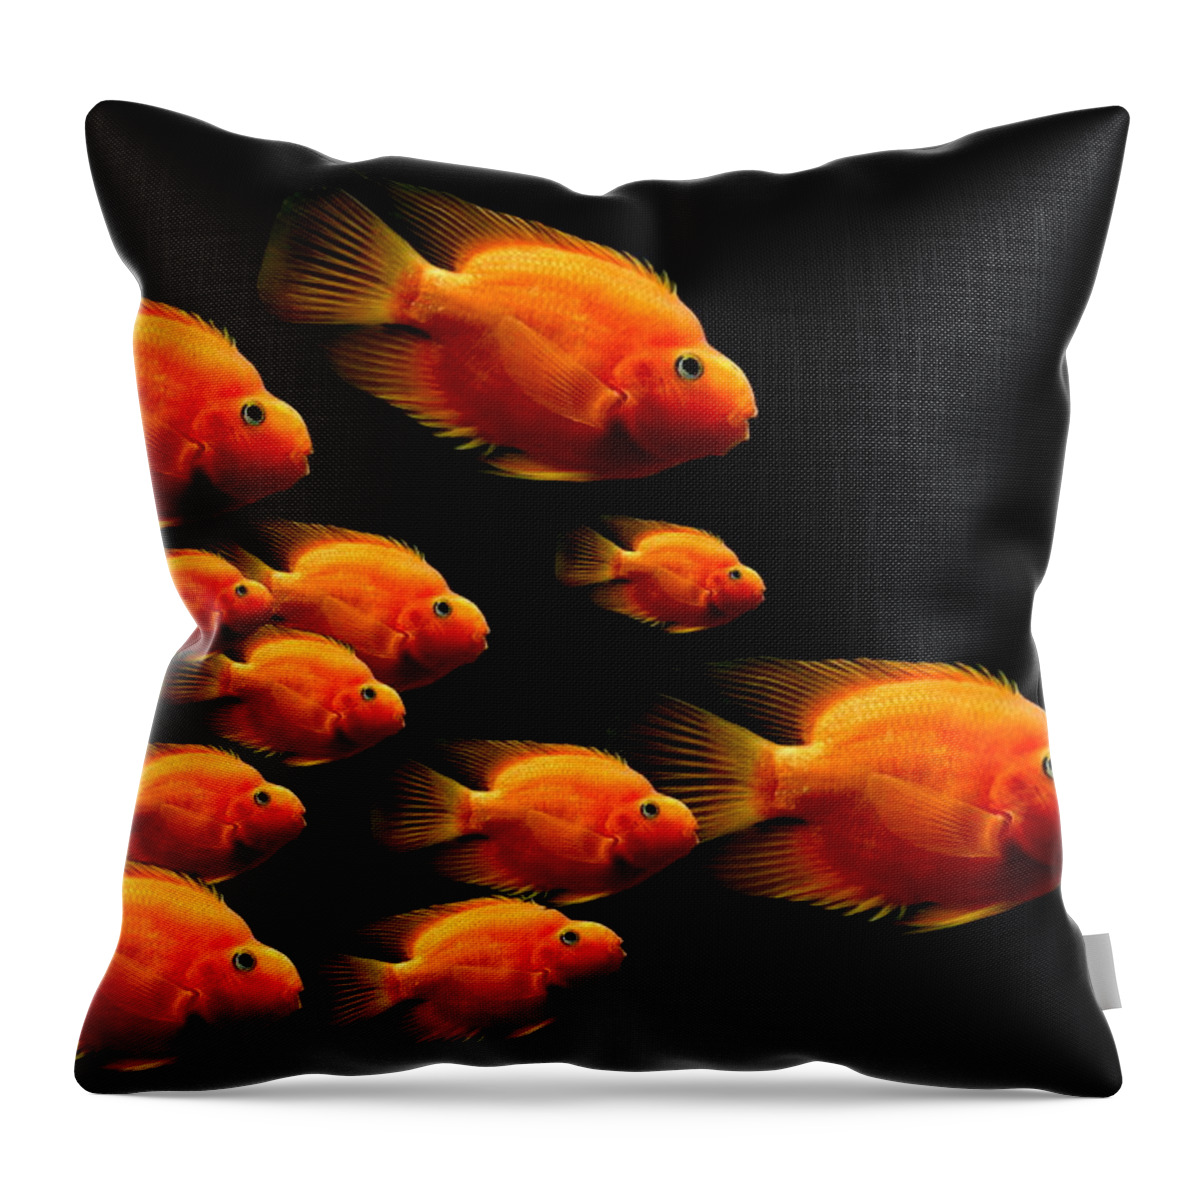 Fish Throw Pillow featuring the photograph Parrot Fish by Heike Hultsch